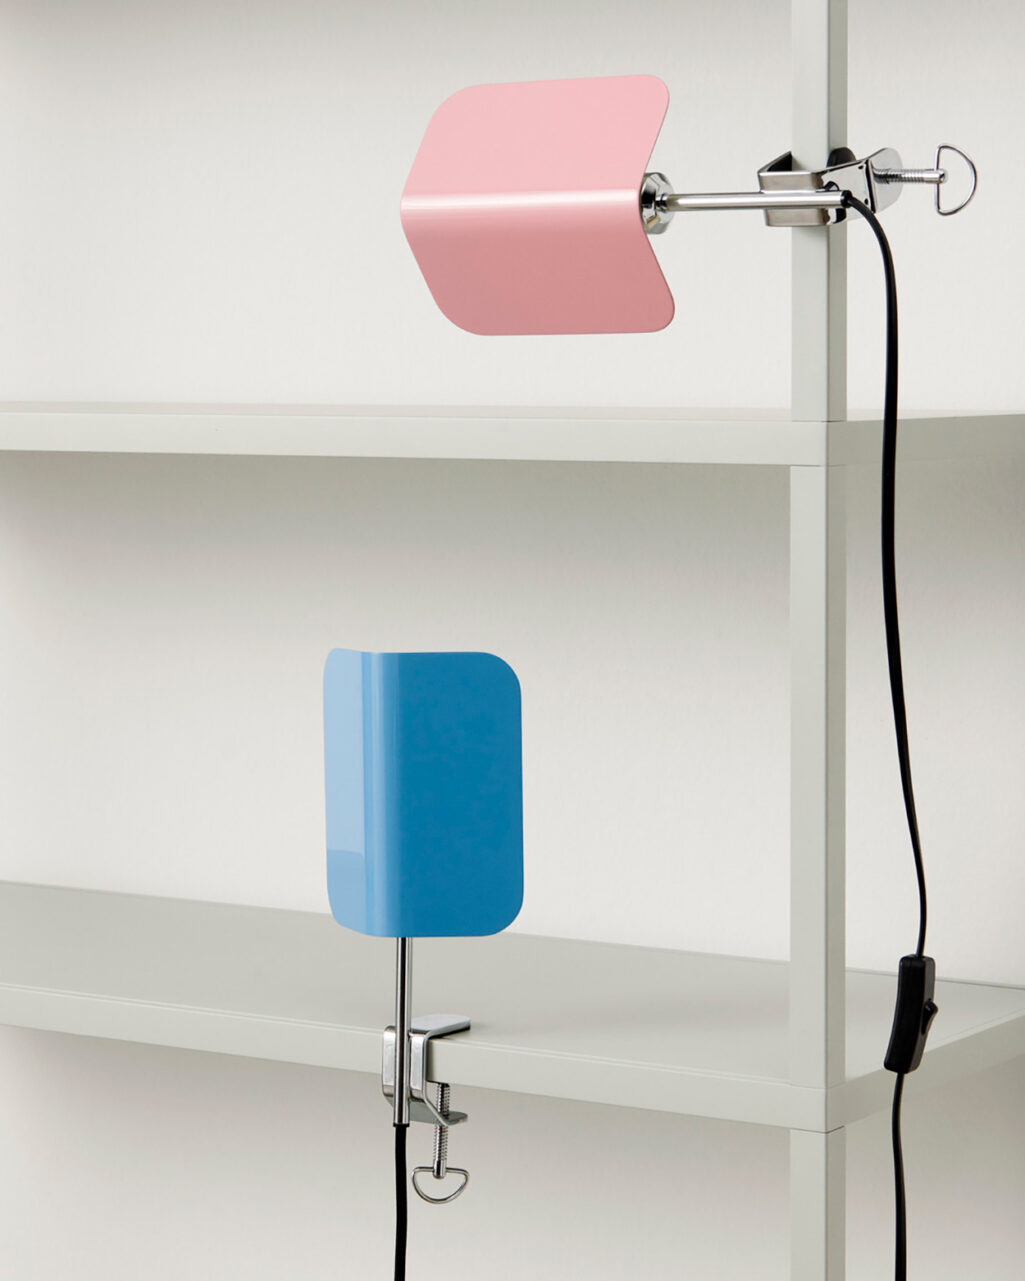 The Apex clip lamp can be fixed to horizontal and vertical surfaces, shown in Luis Pink and Pastel Blue 